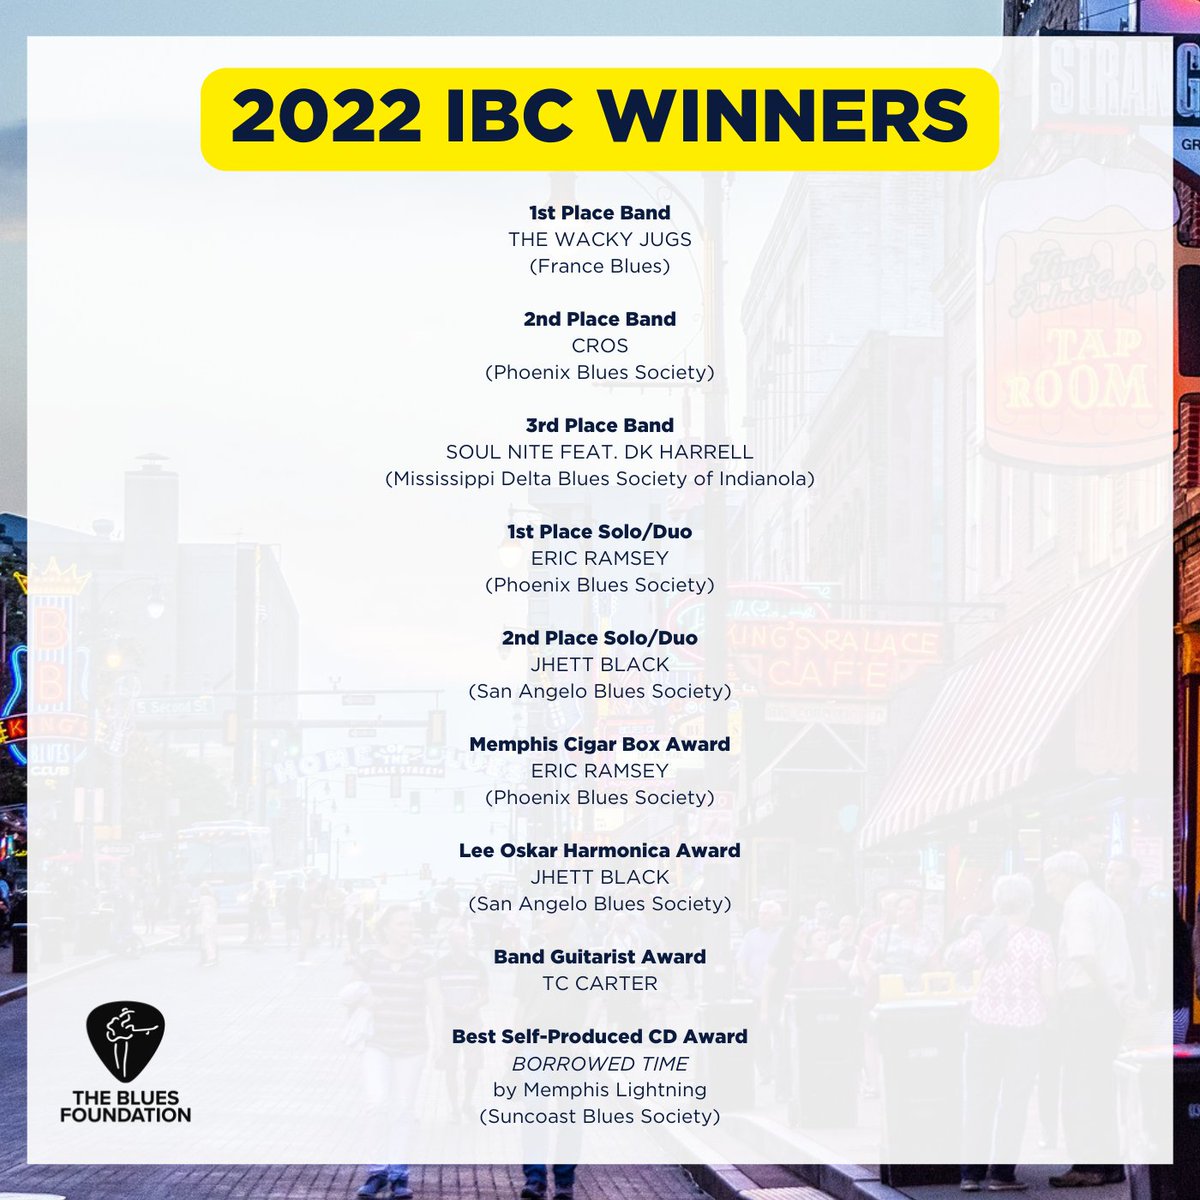 Congratulations to the 37th International Blues Challenge WINNERS!!! 🎶🎸 #IBC2022